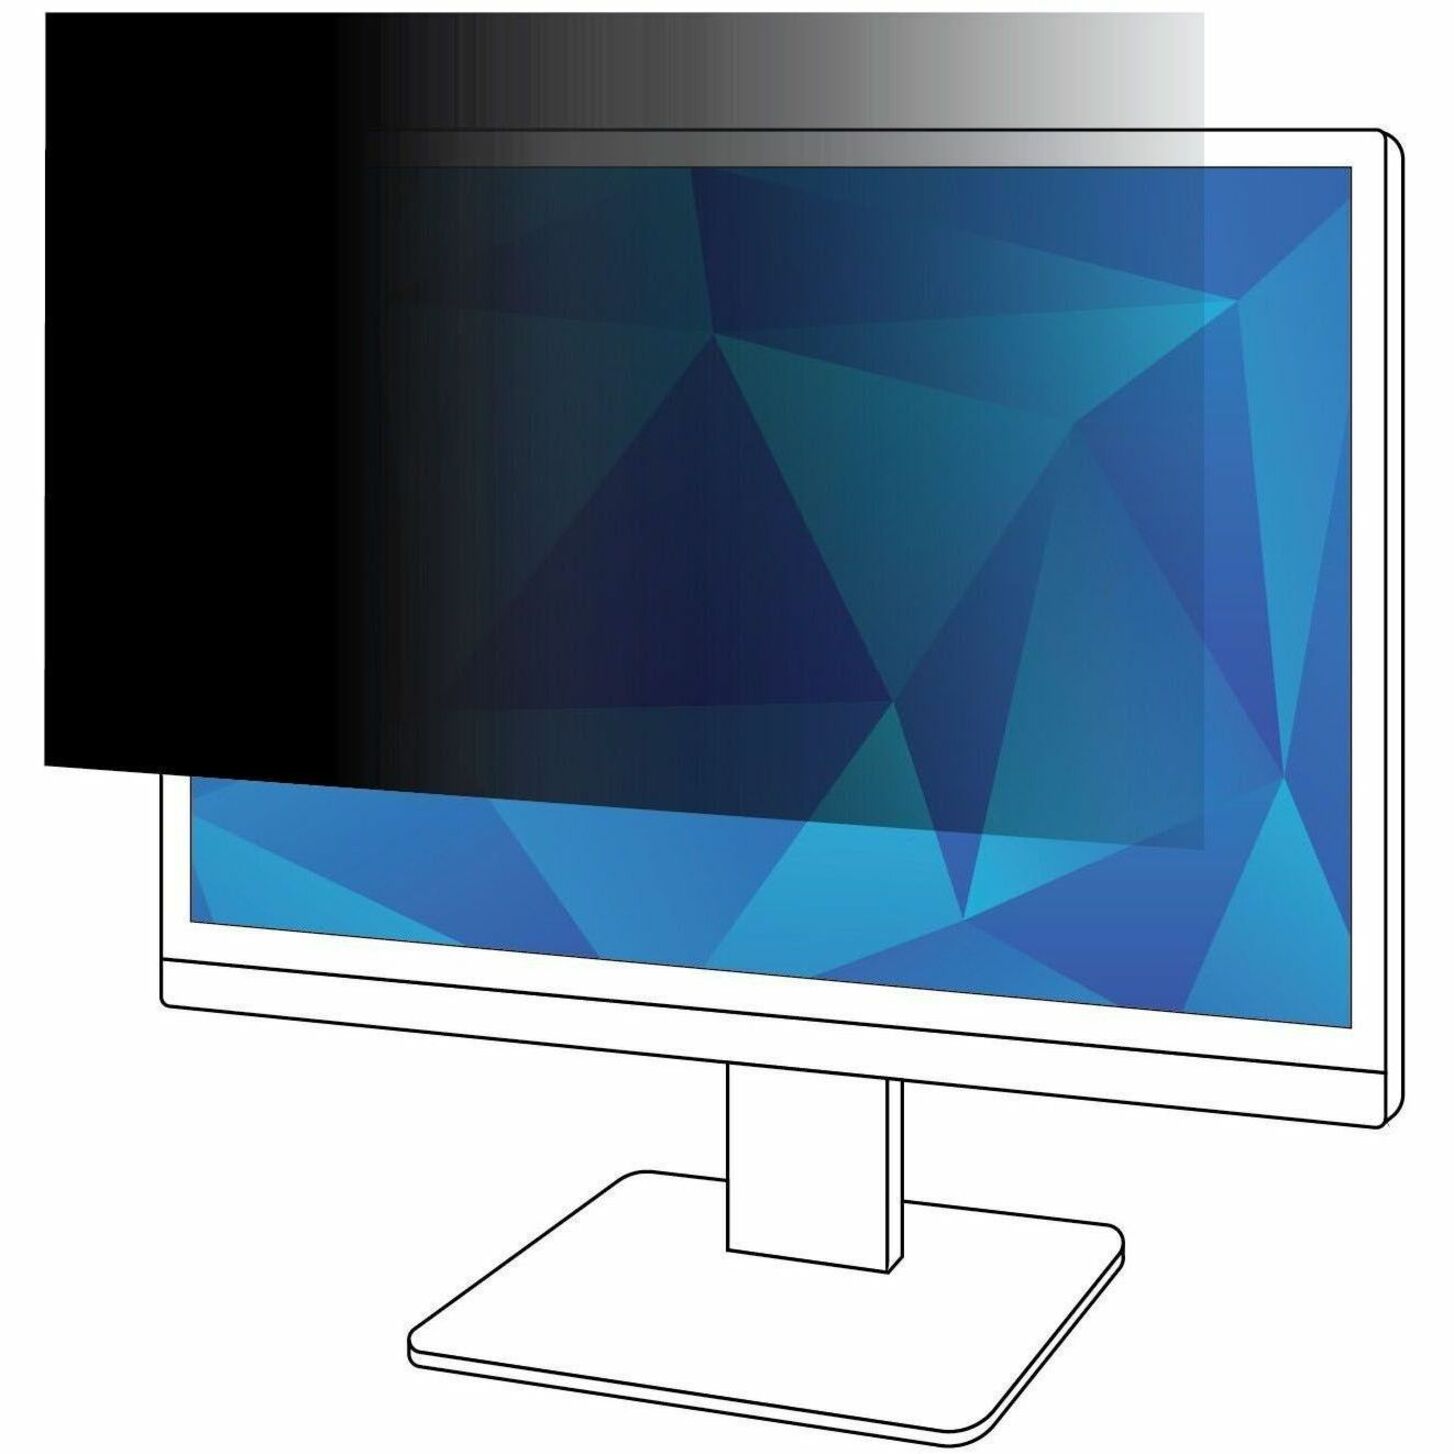 3M PF240W9B Privacy Filter for Widescreen LCD Monitor 24", Black - Easy to Apply, Easy to Clean, Limited Viewing Angle, Privacy